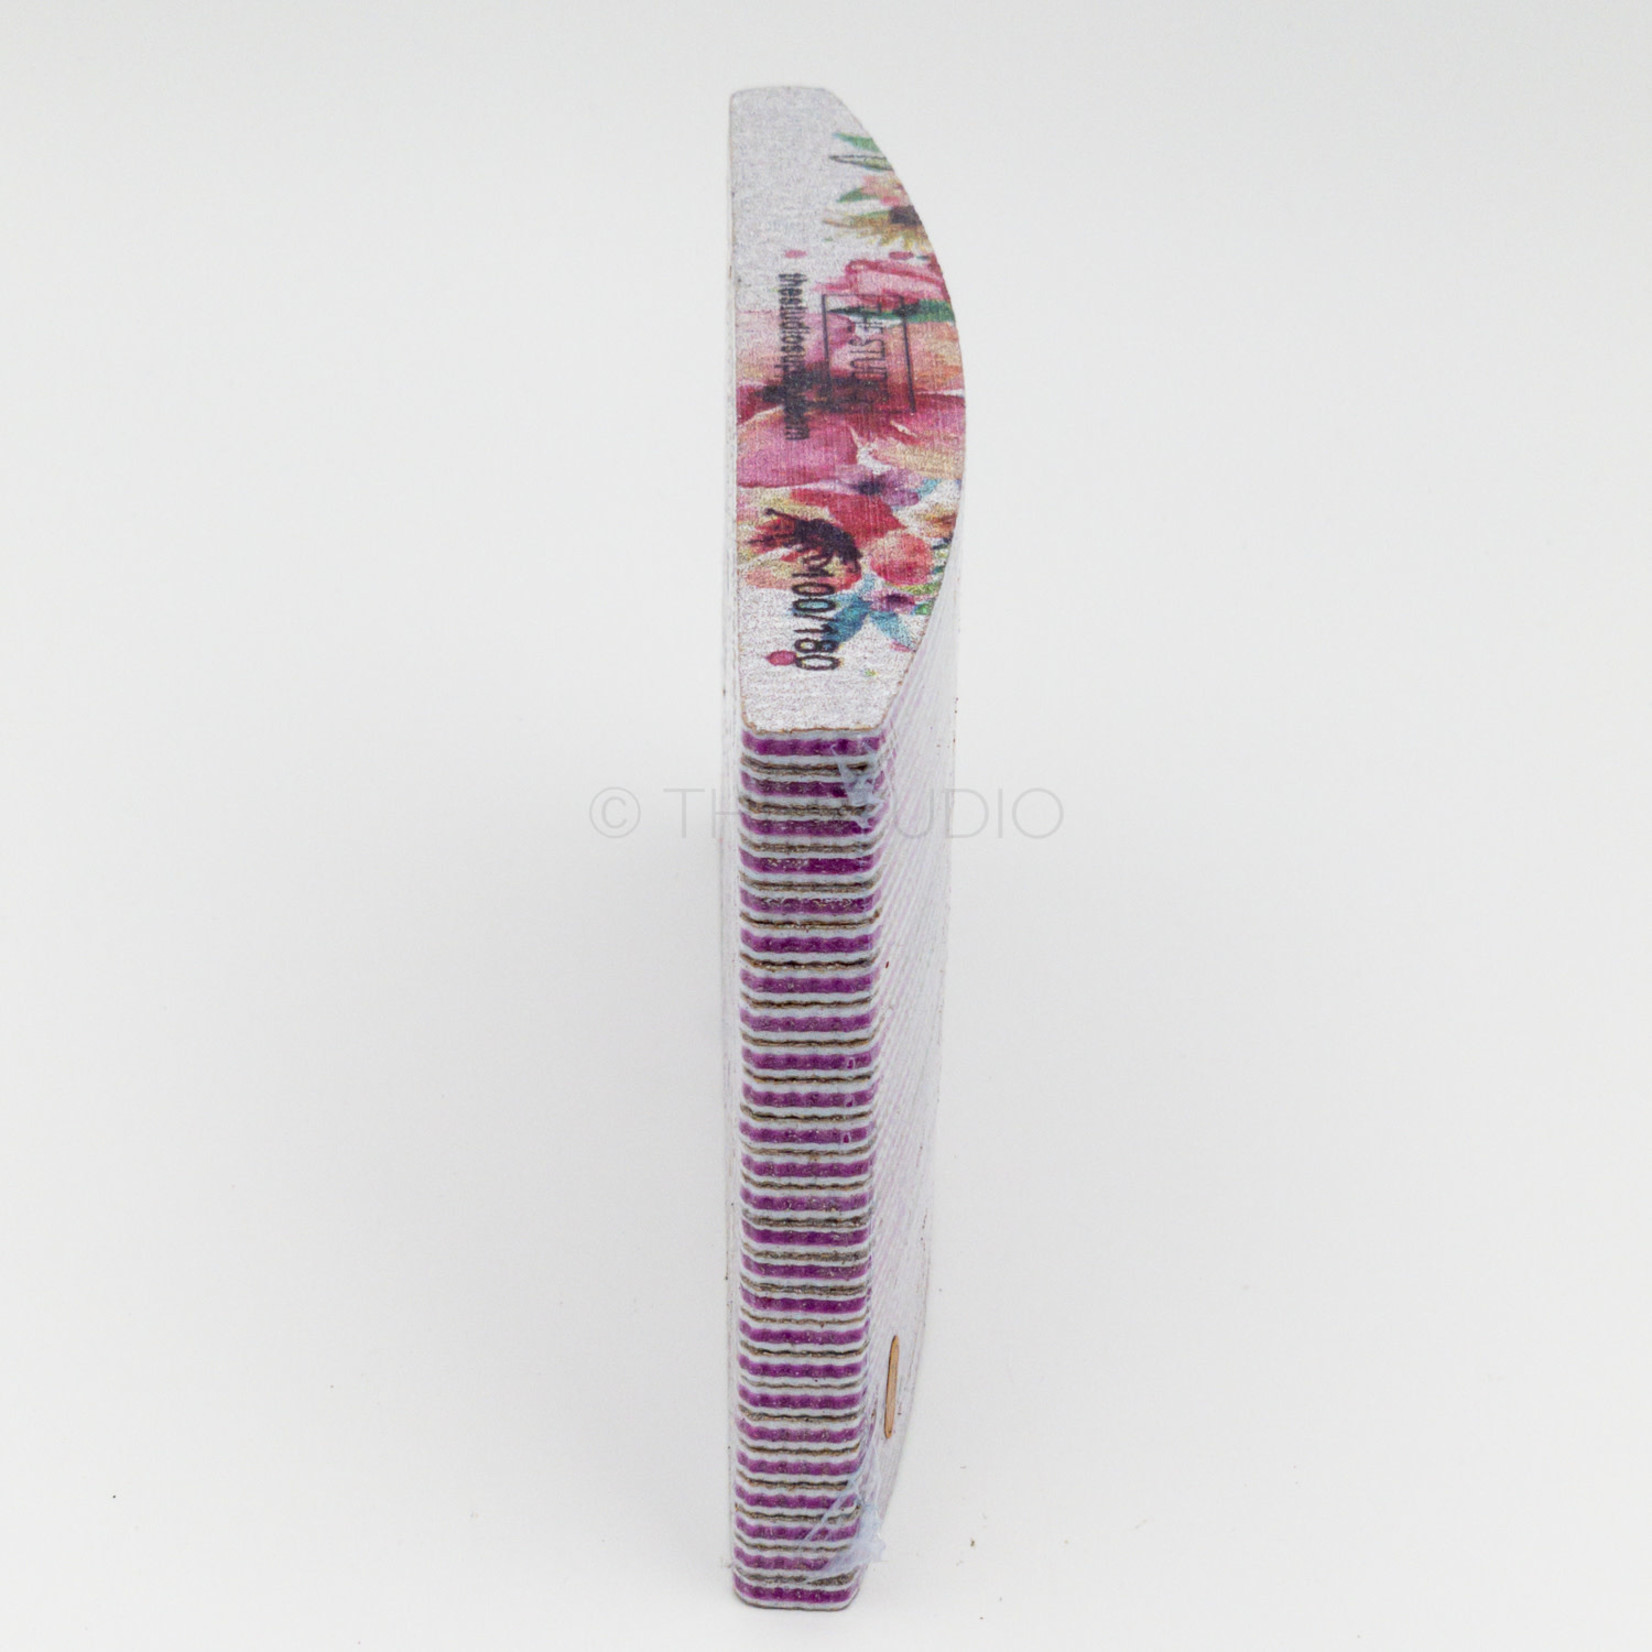 The Studio The Studio - Files - Oval - 100/180 - Zebra/ Pink - Floral - 25 Count